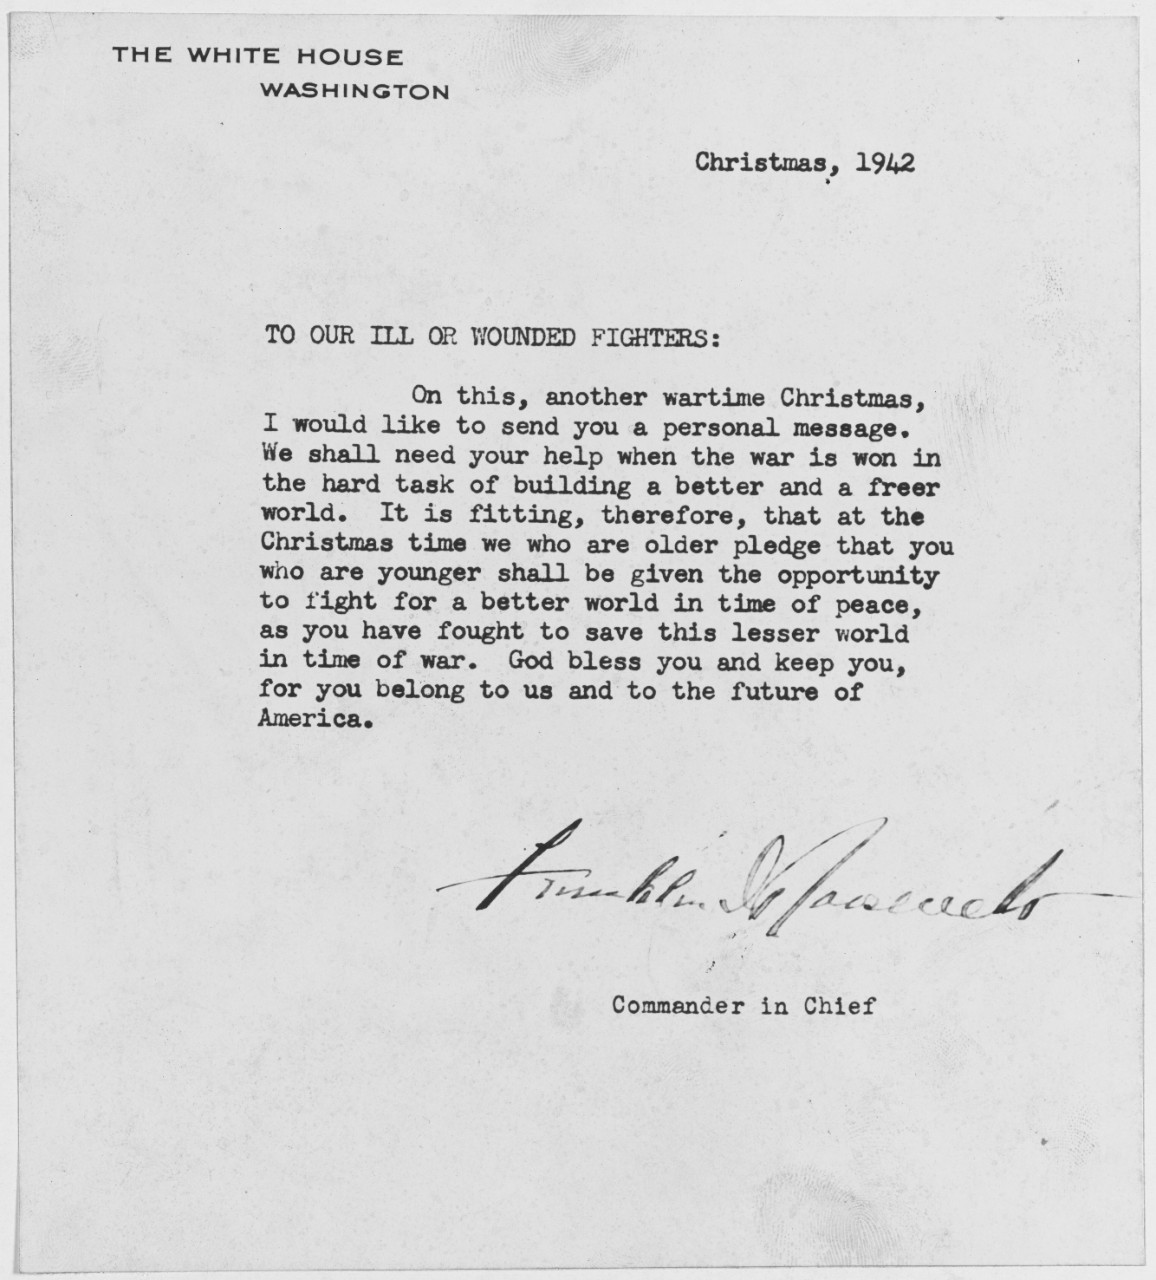 Letter from Franklin D. Roosevelt to Ill and Wounded Service Members, 1942.